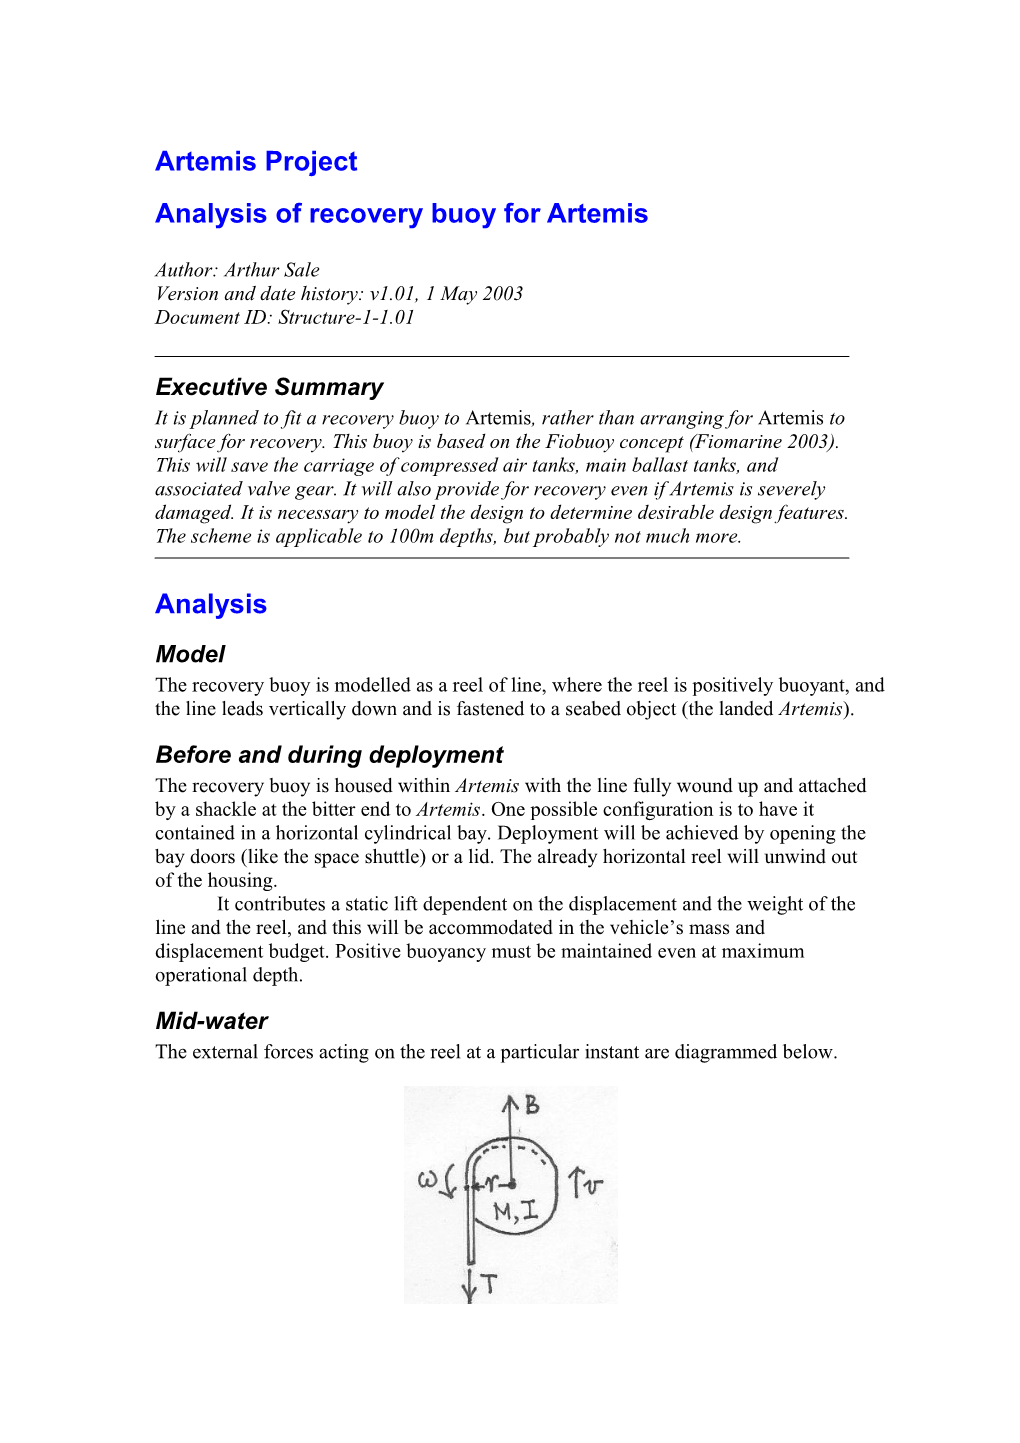 Analysis of Recovery Buoy for Artemis